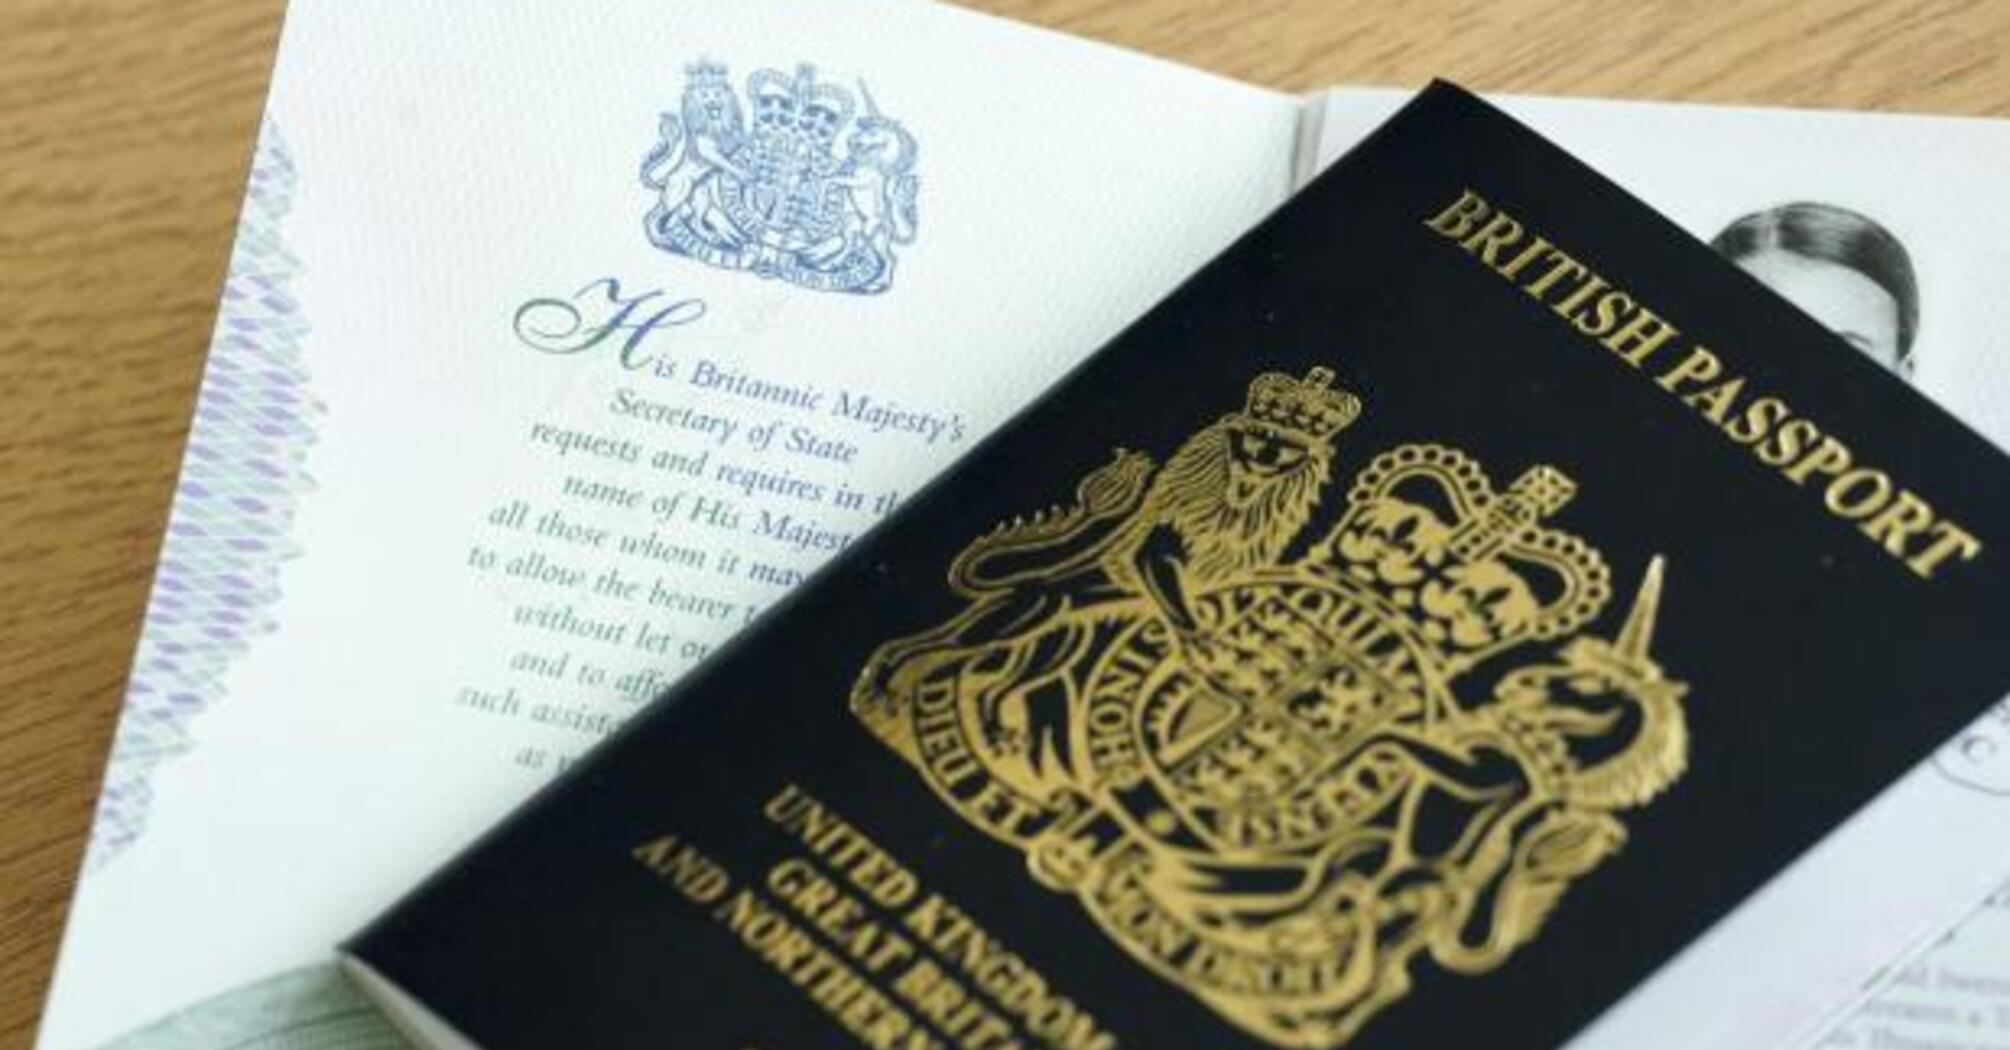 New passports are being issued in Great Britain